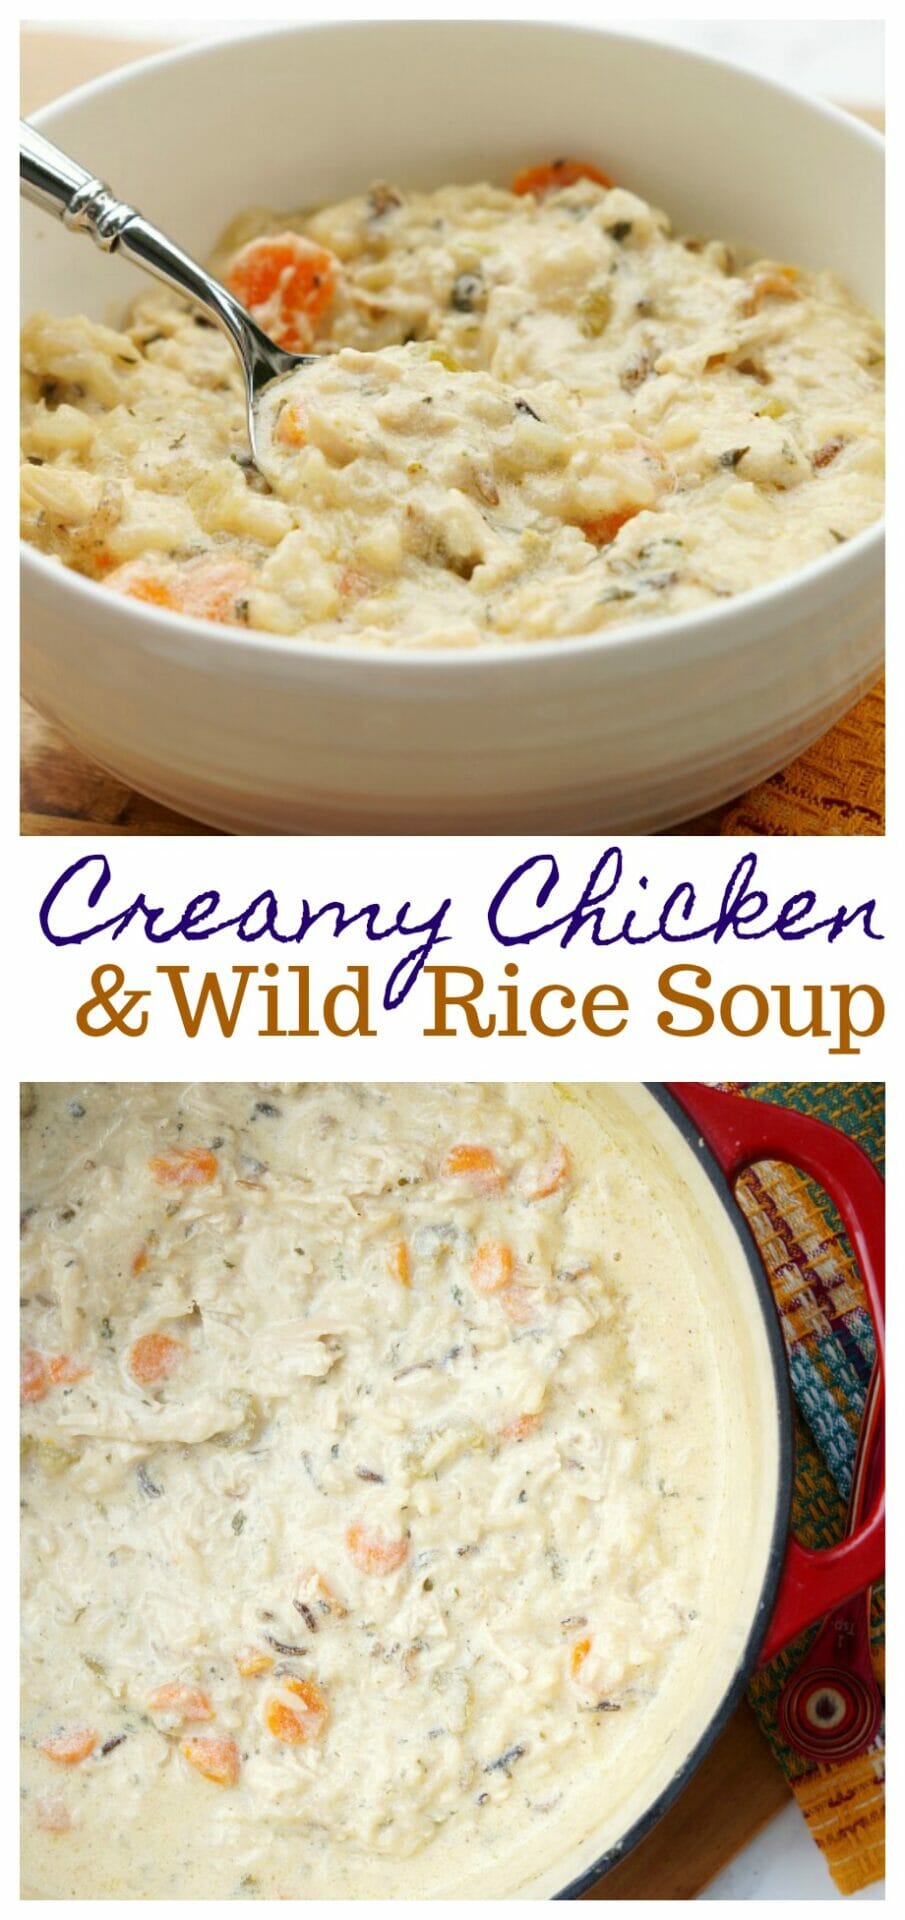 Quick and Easy Creamy Chicken and Wild Rice Soup. A filling comfort food meal that your family will love!